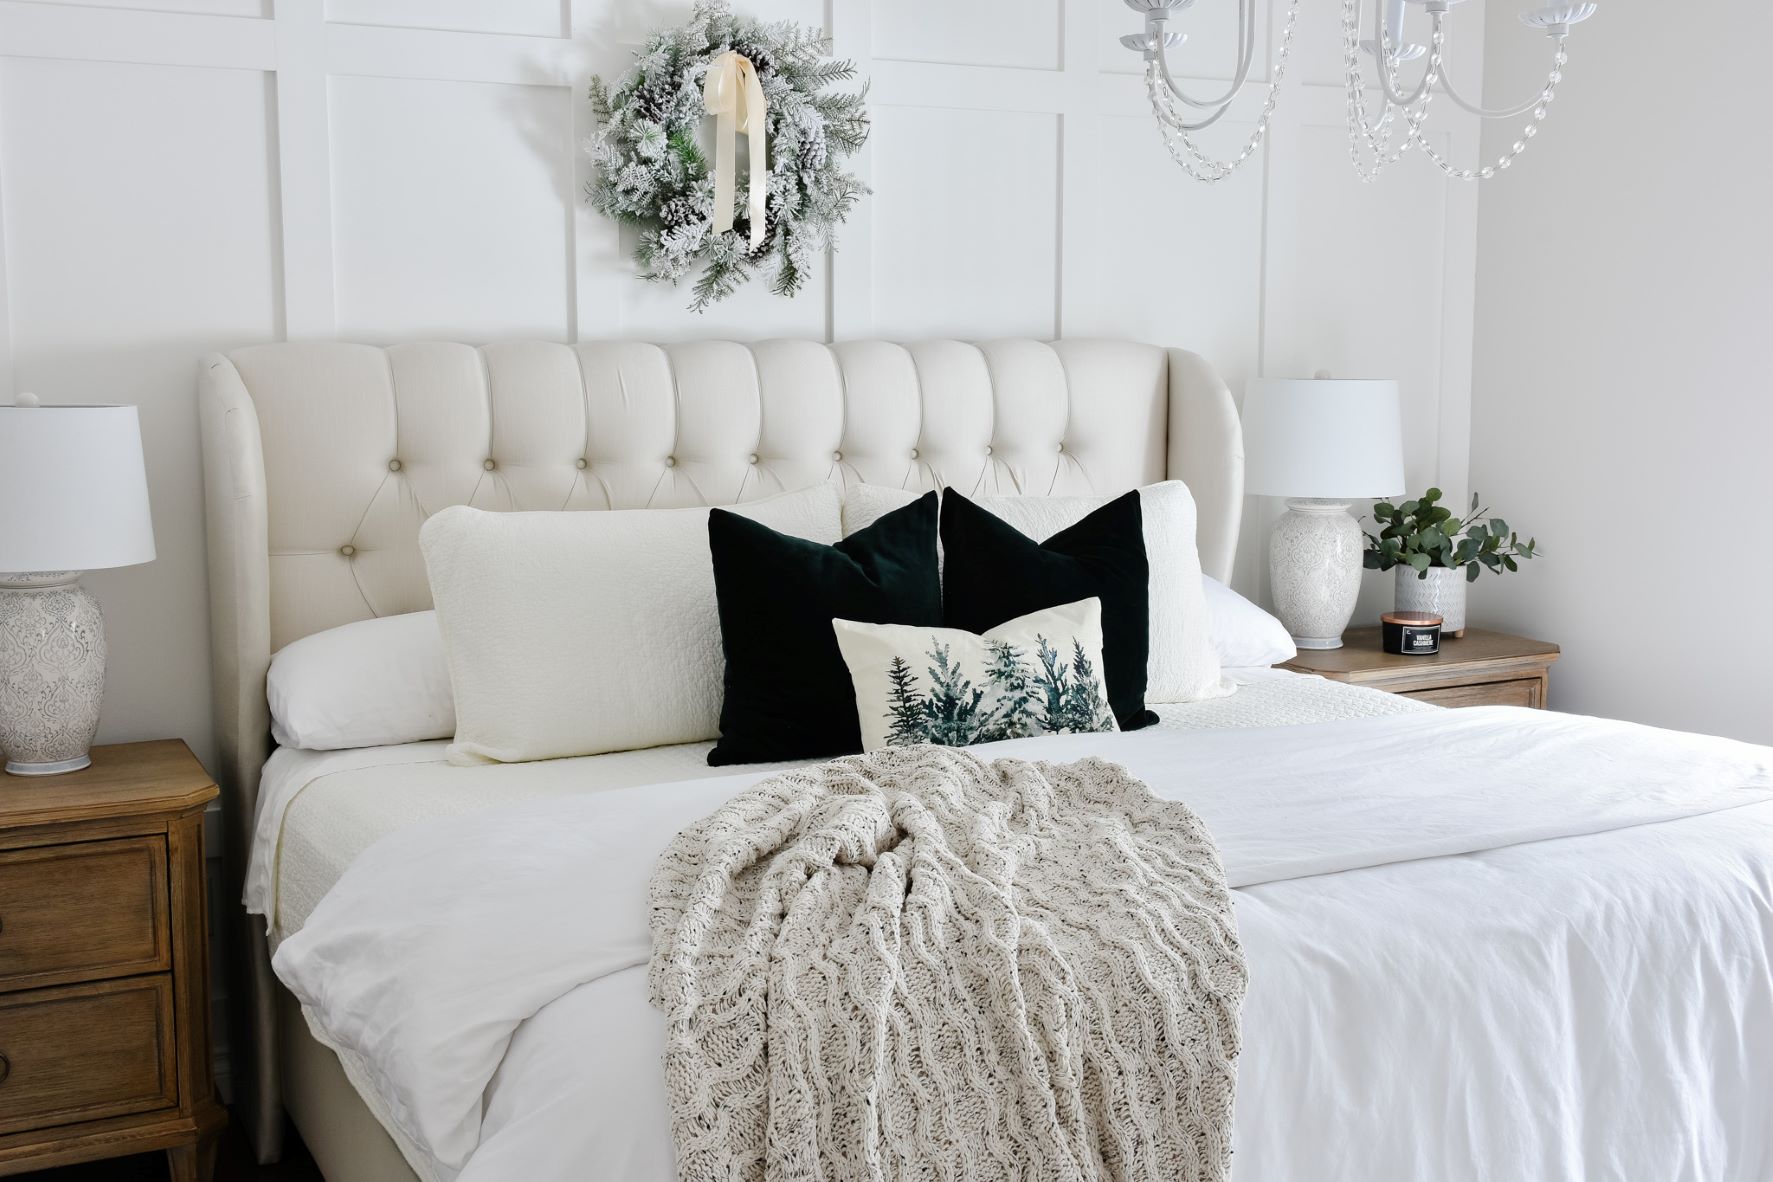 How to Prepare Your Guest Room for the Christmas